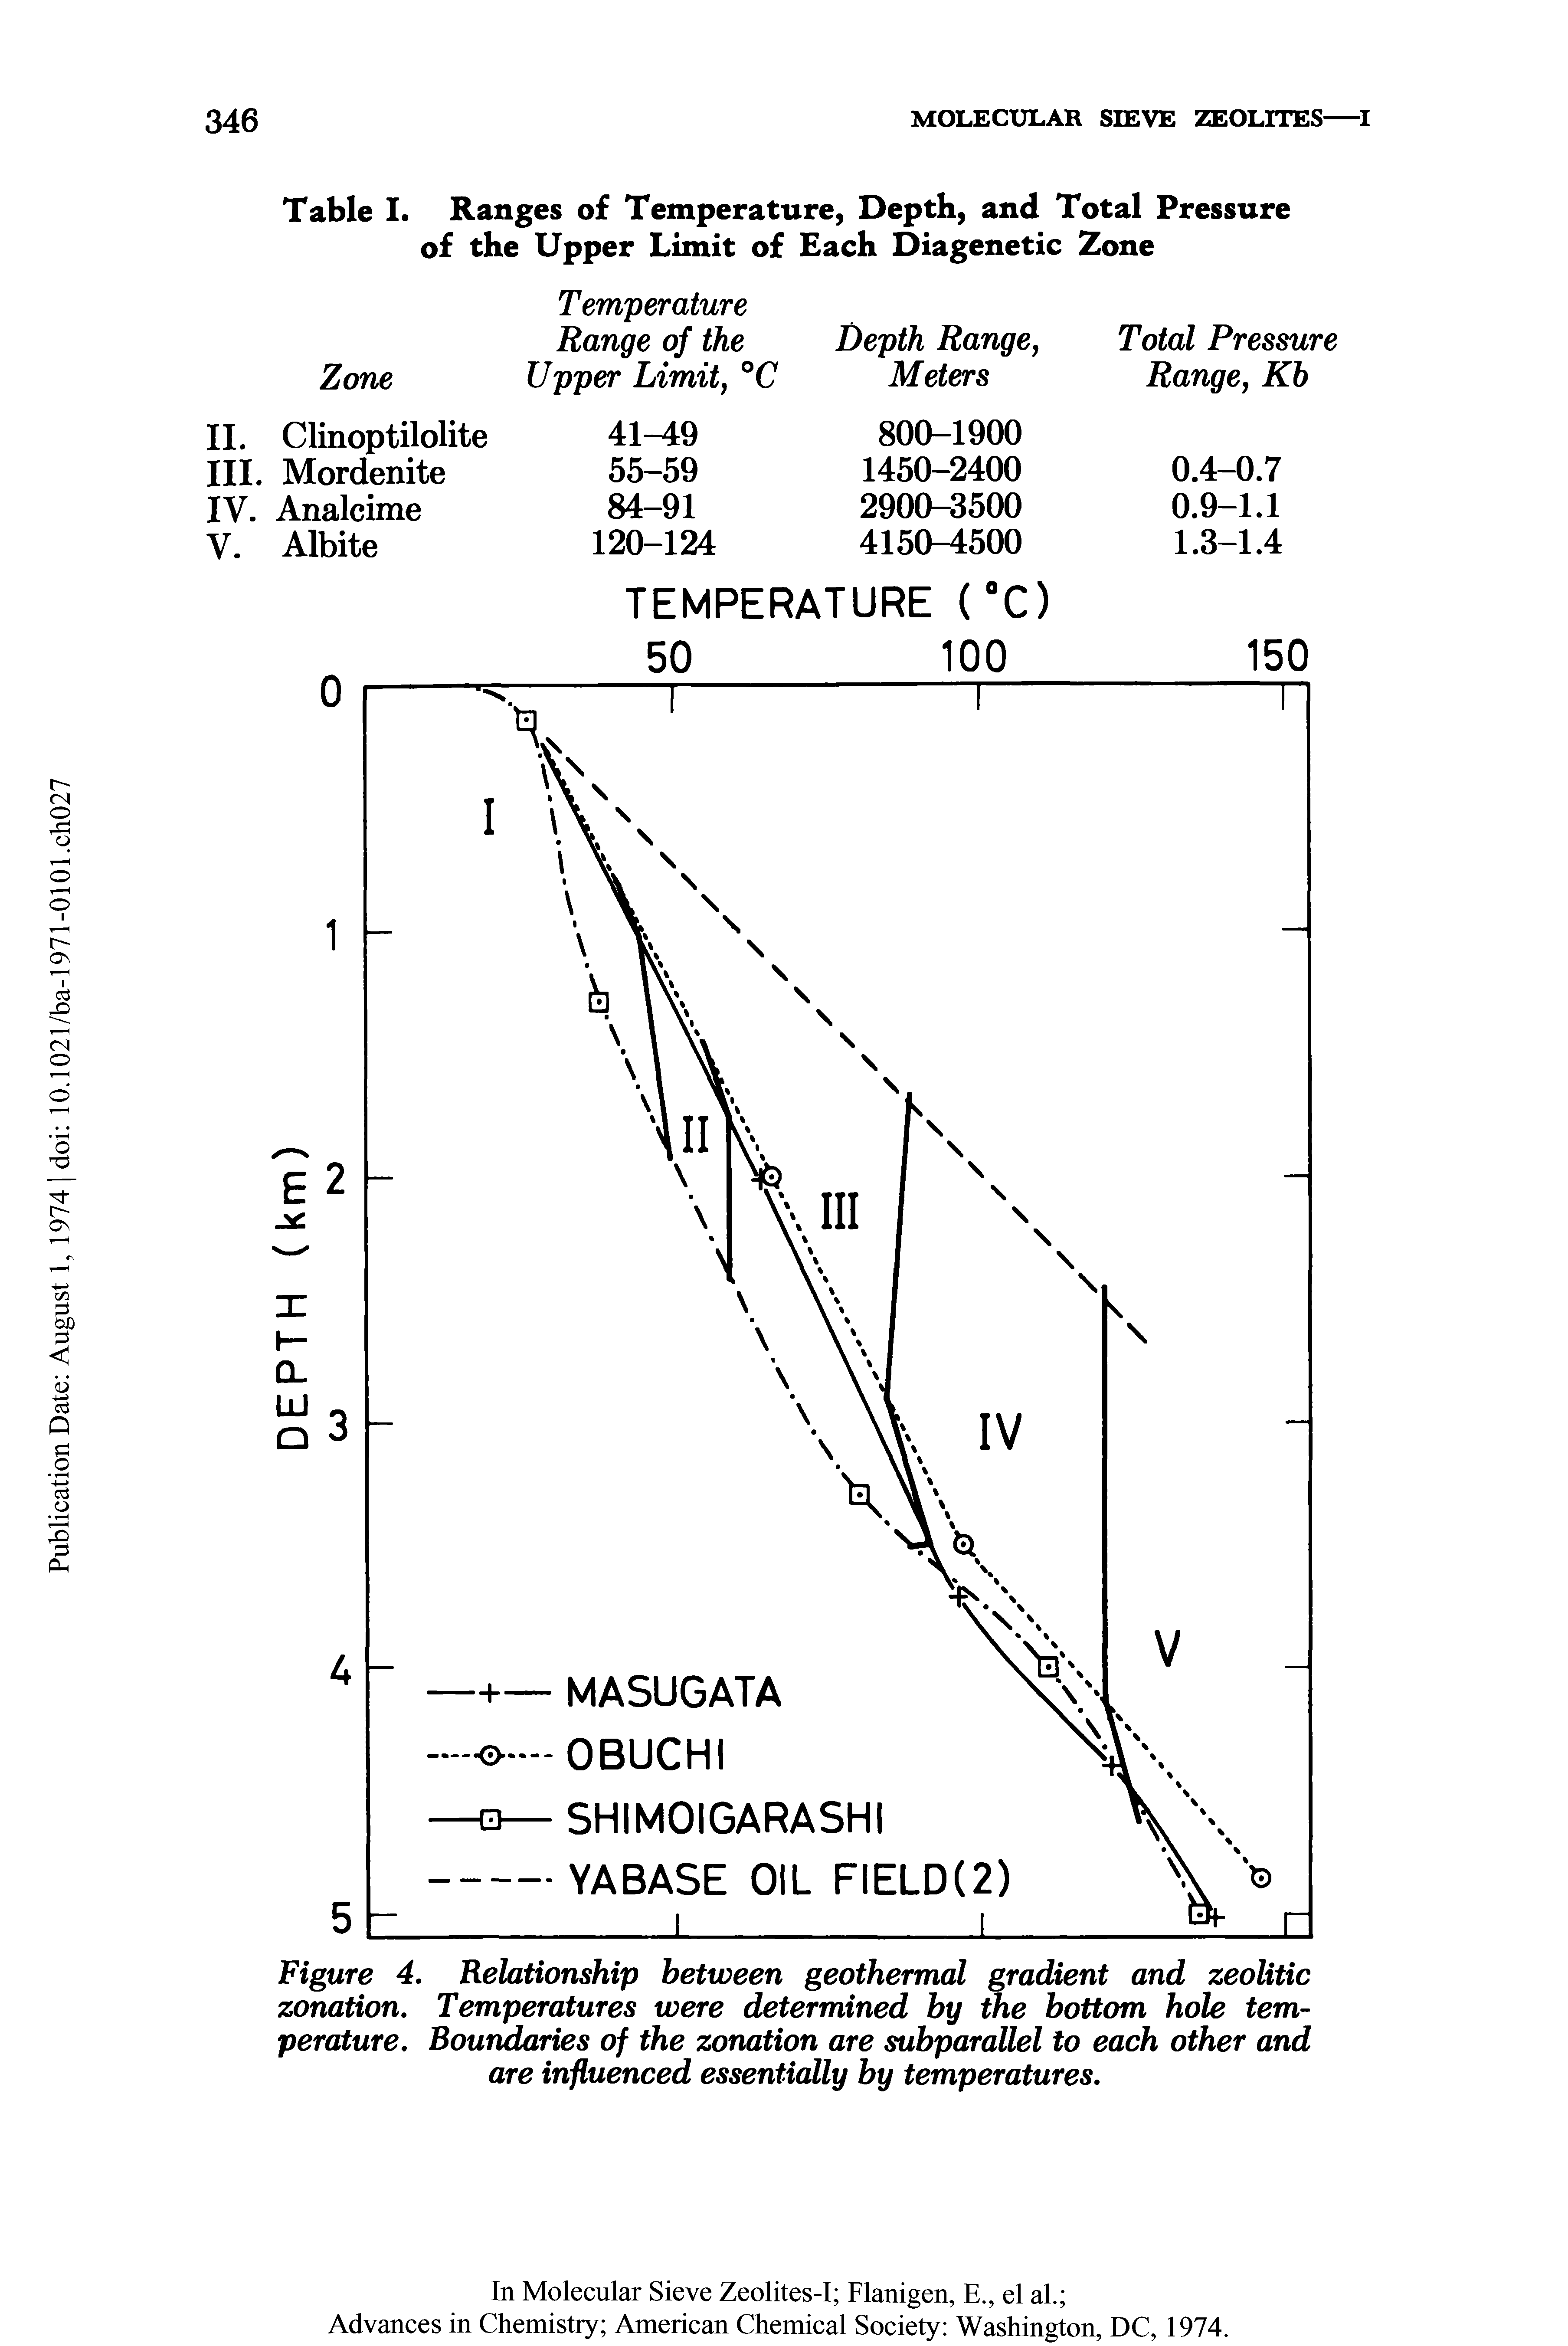 Figure 4. Relationship between geothermal gradient and zeolitic zonation. Temperatures were determined by the bottom hole temperature. Boundaries of the zonation are subparallel to each other and are influenced essentially by temperatures.